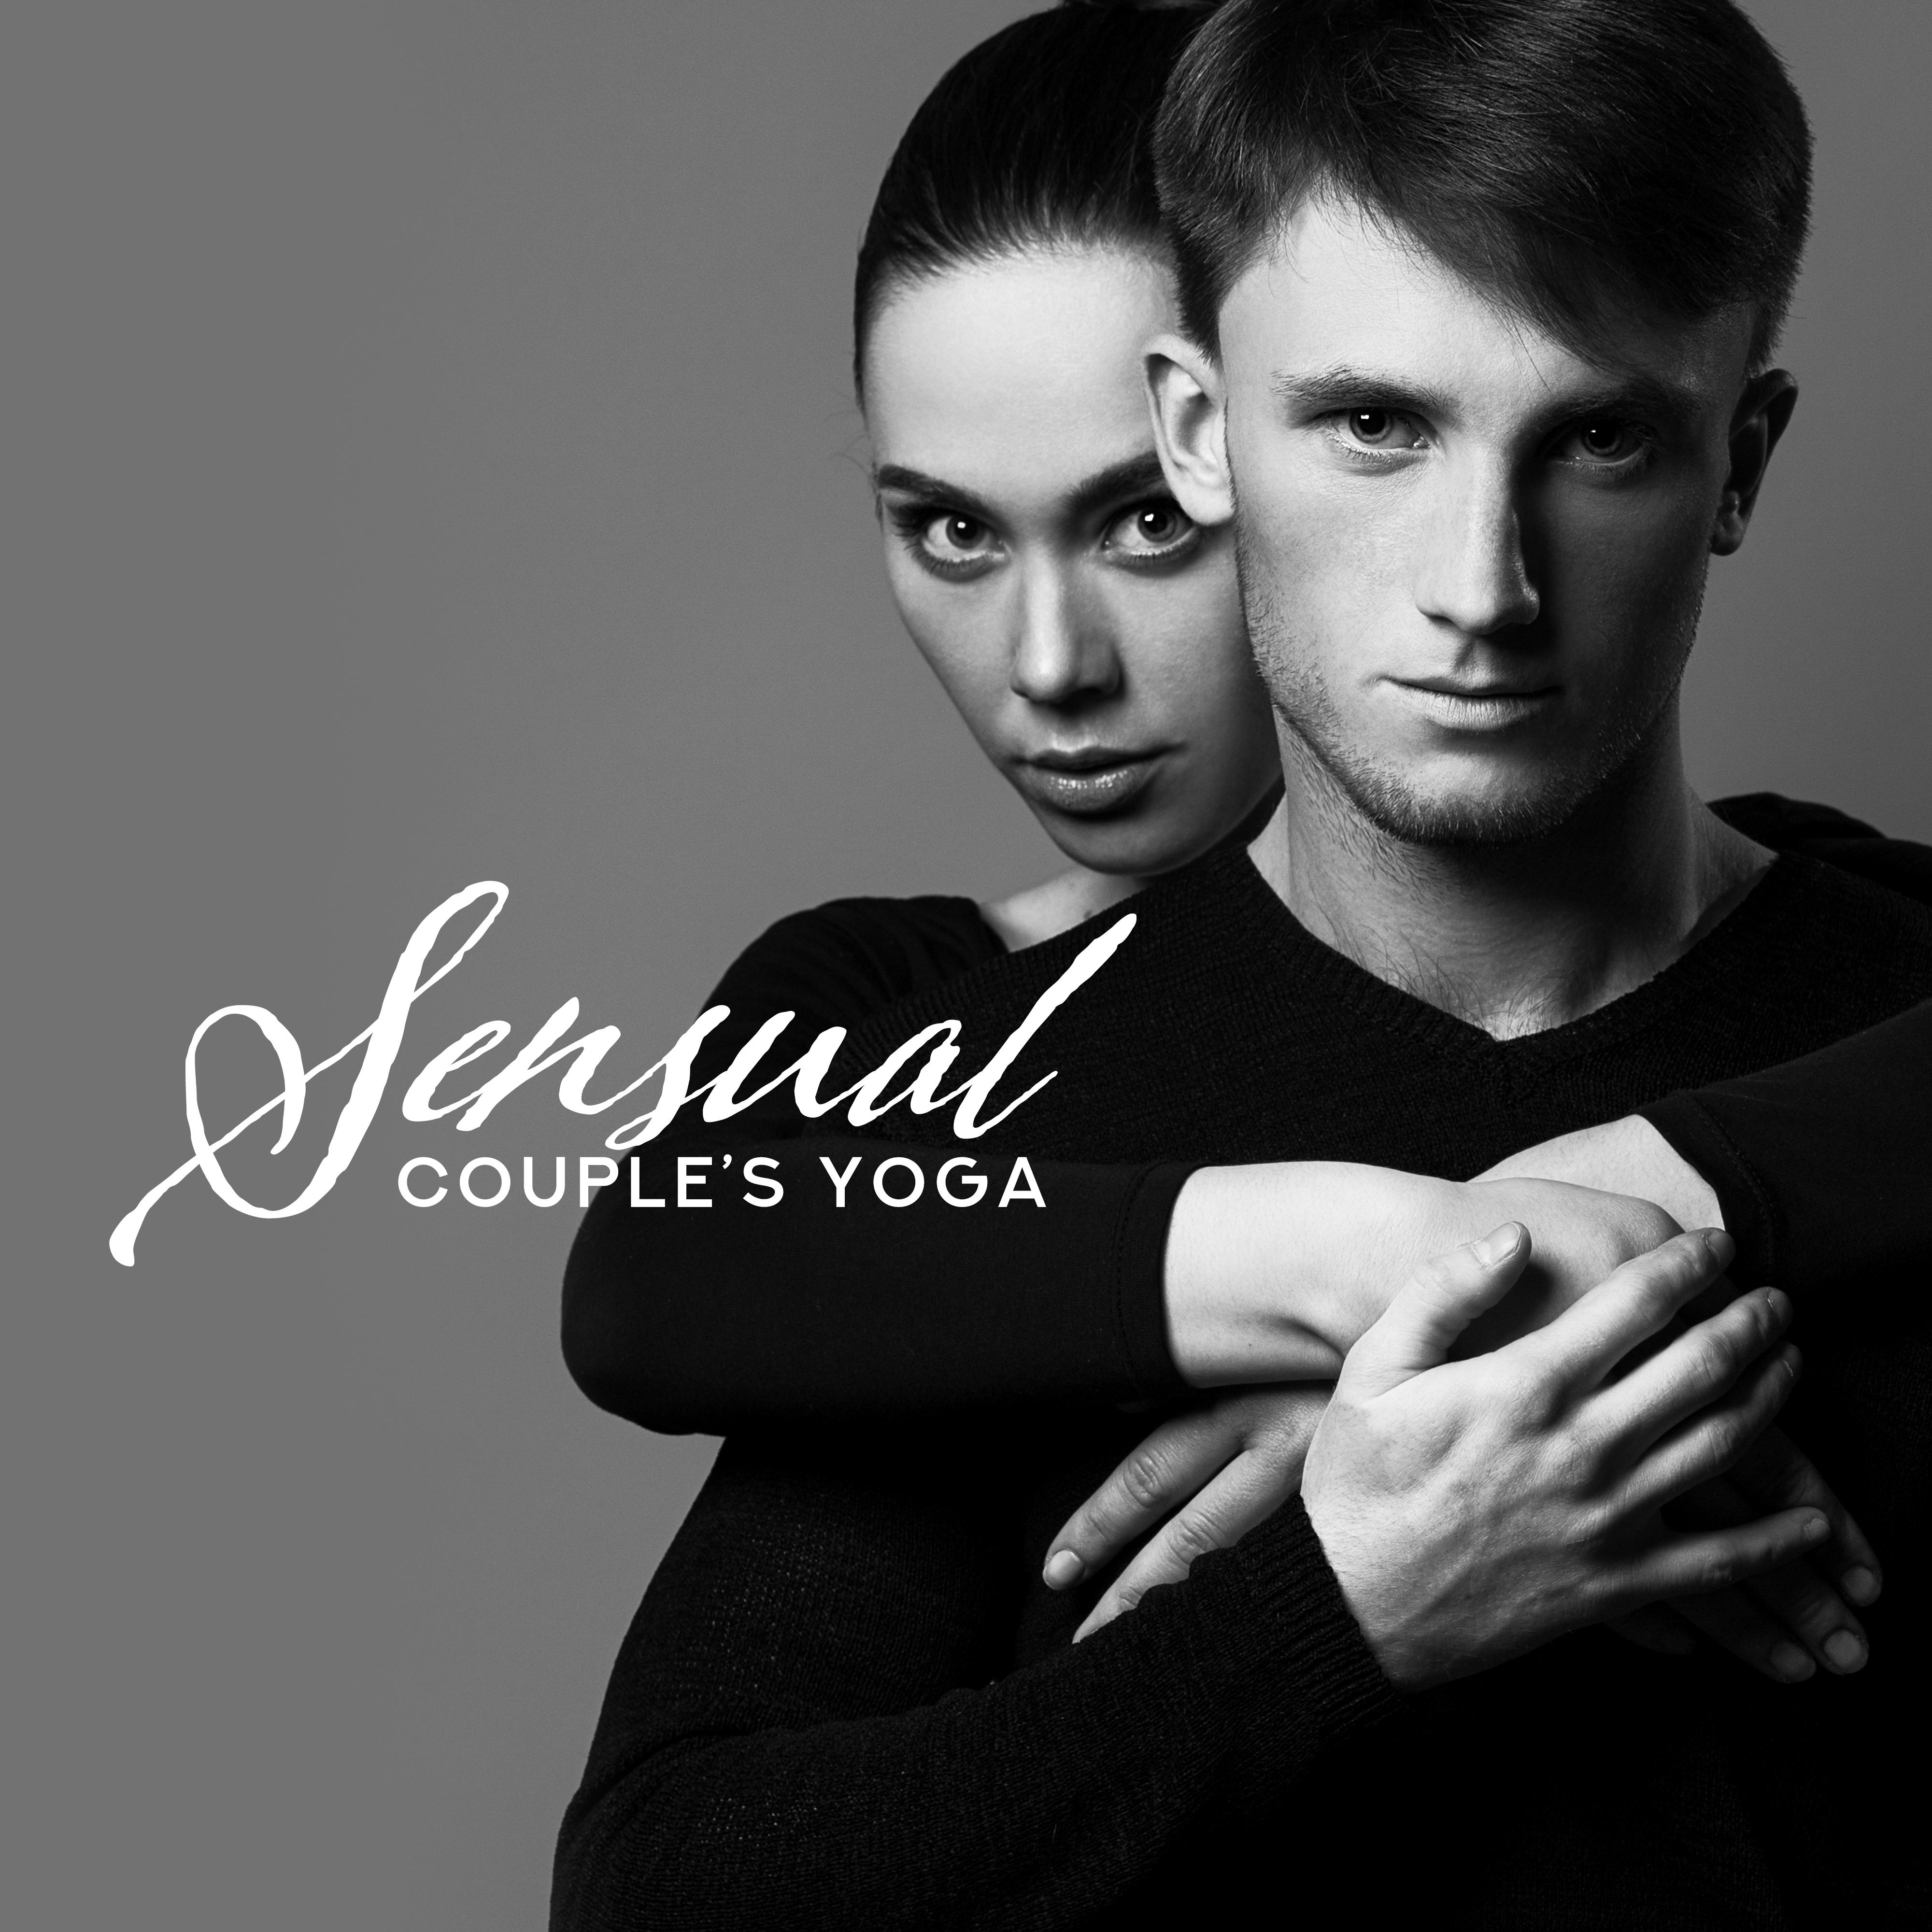 Sensual Couple’s Yoga: 2019 New Age Music for Deep Meditation for Two, Train All Yoga Poses, Tantric Contemplation